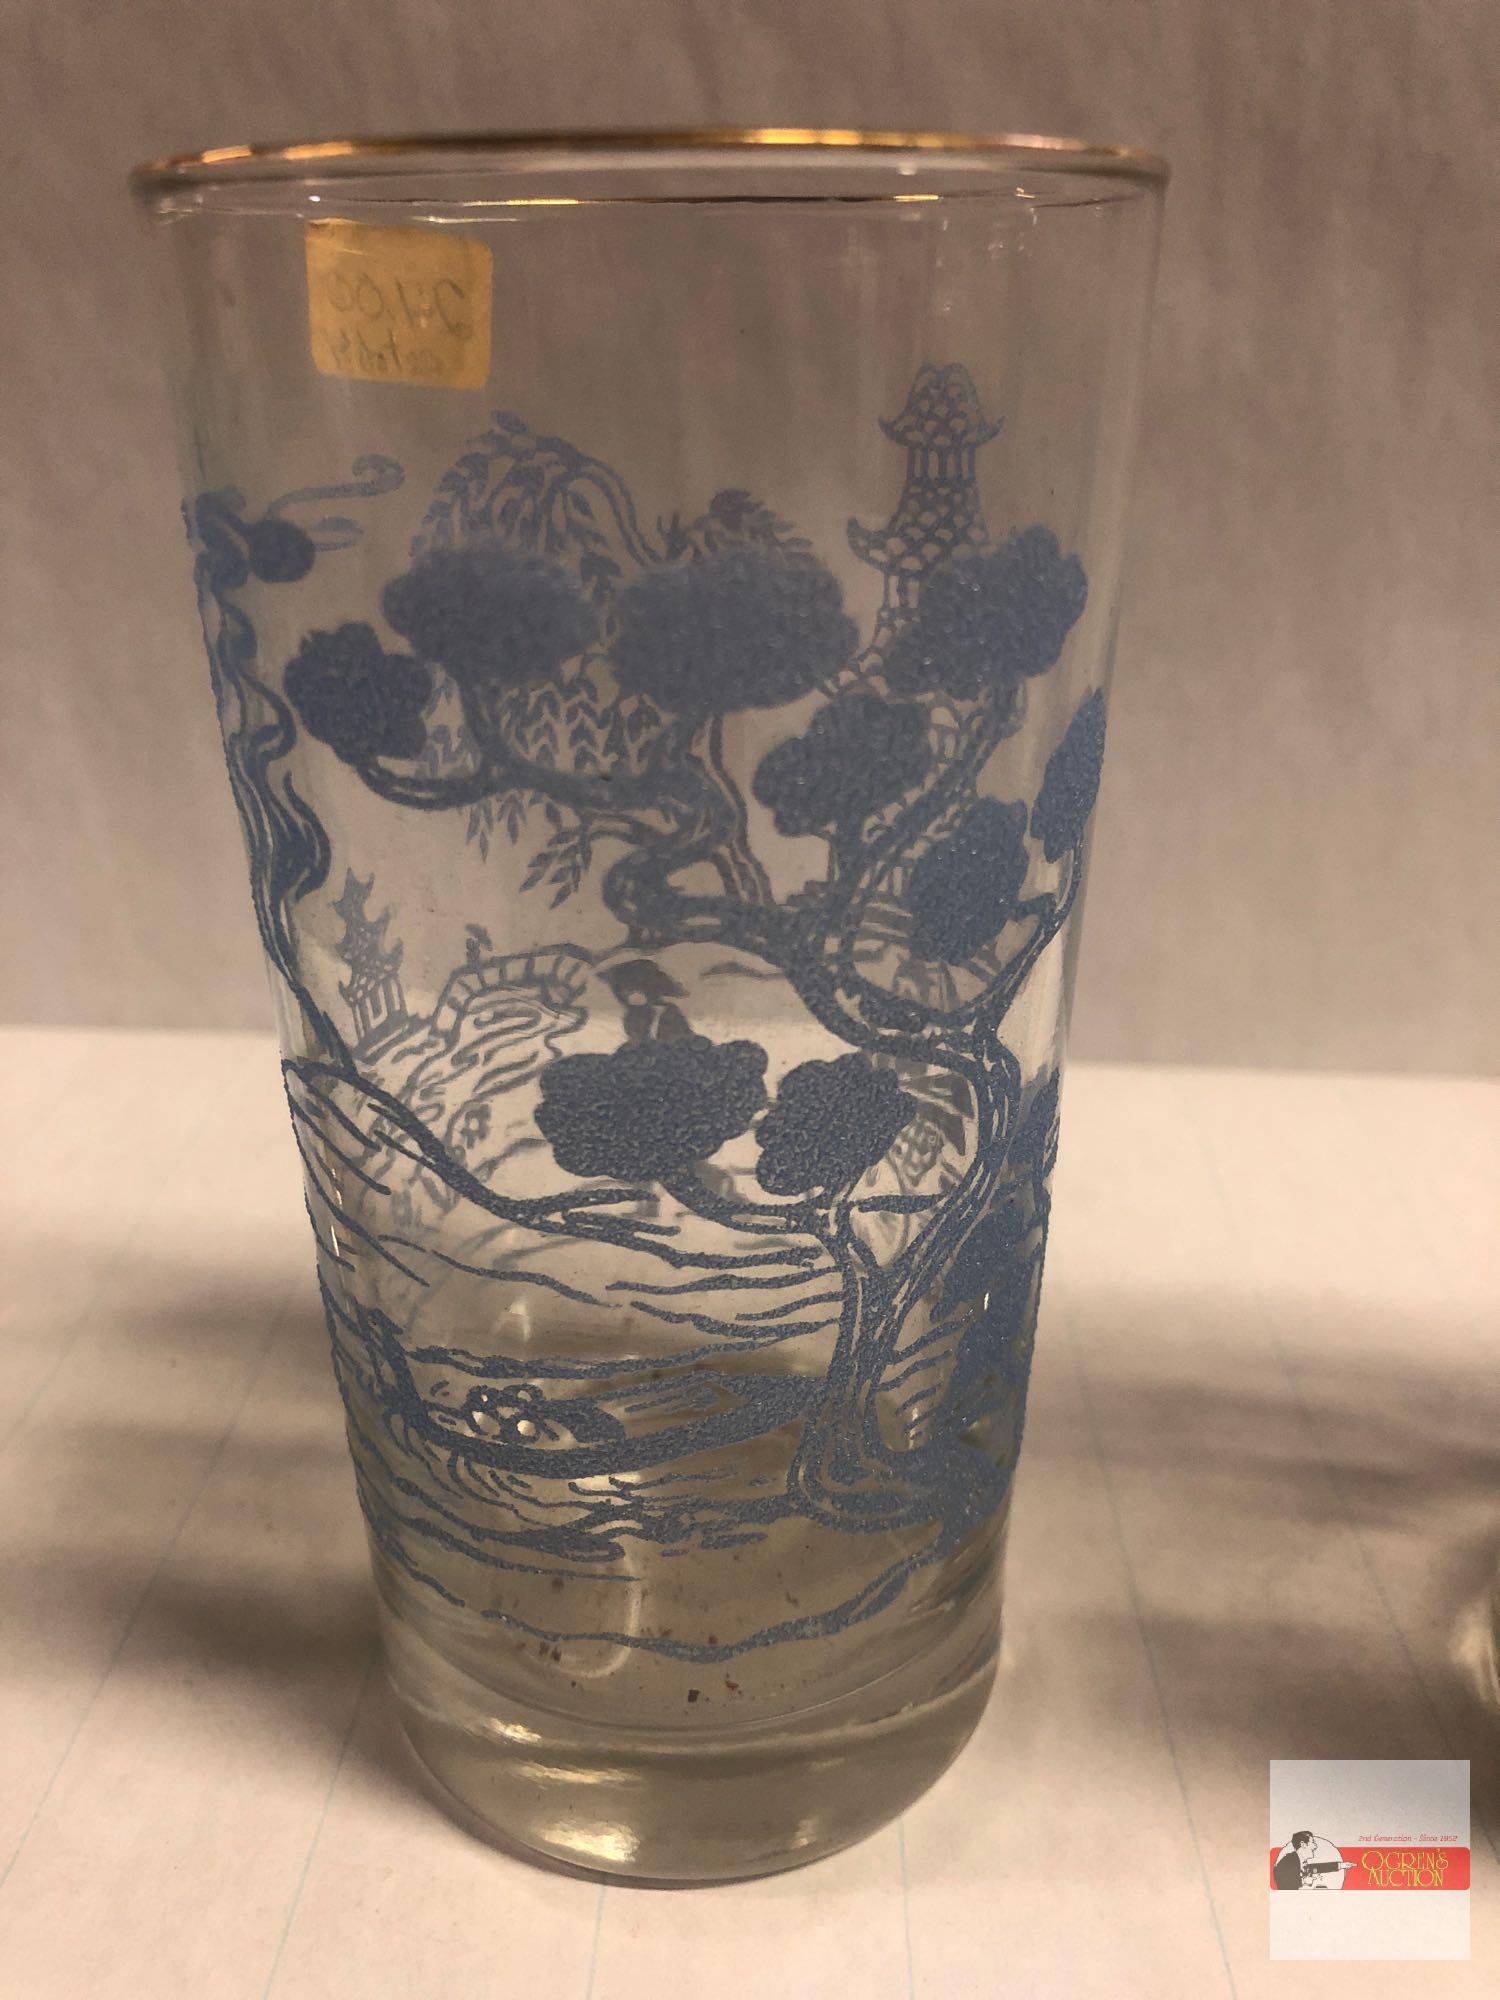 Asian items - 5 - Vase (chipped lip) 8"h, 4 tumblers 5.25"h